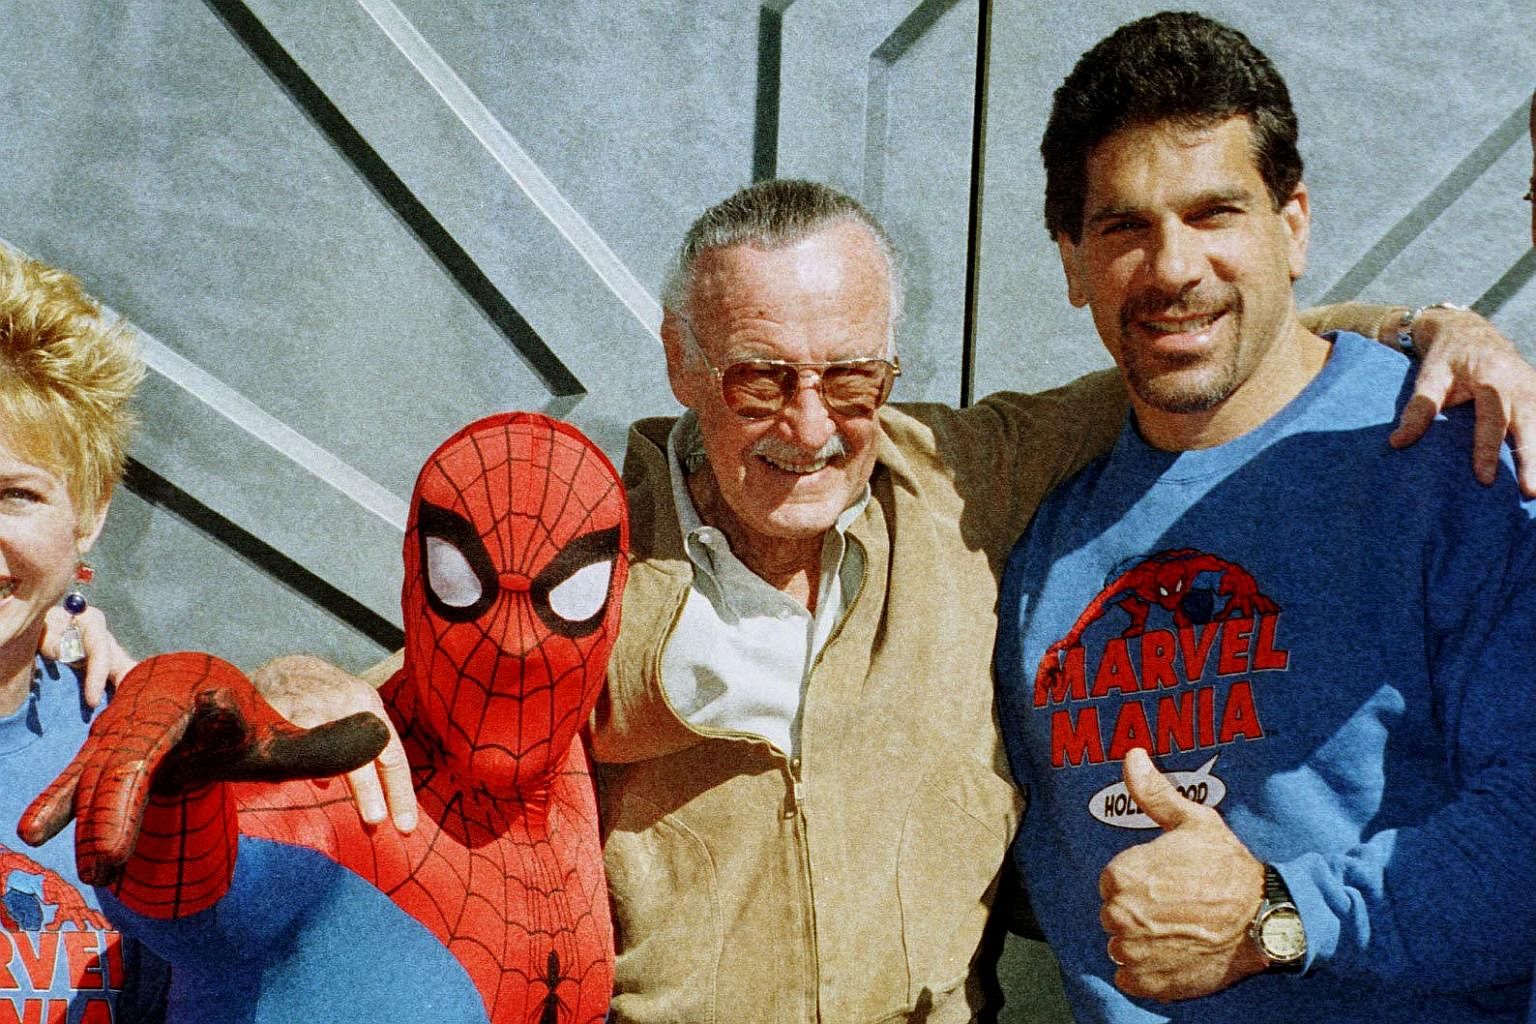 Stan Lee, creator of Spider-Man and other Marvel superheroes, dies aged 95  | The Straits Times